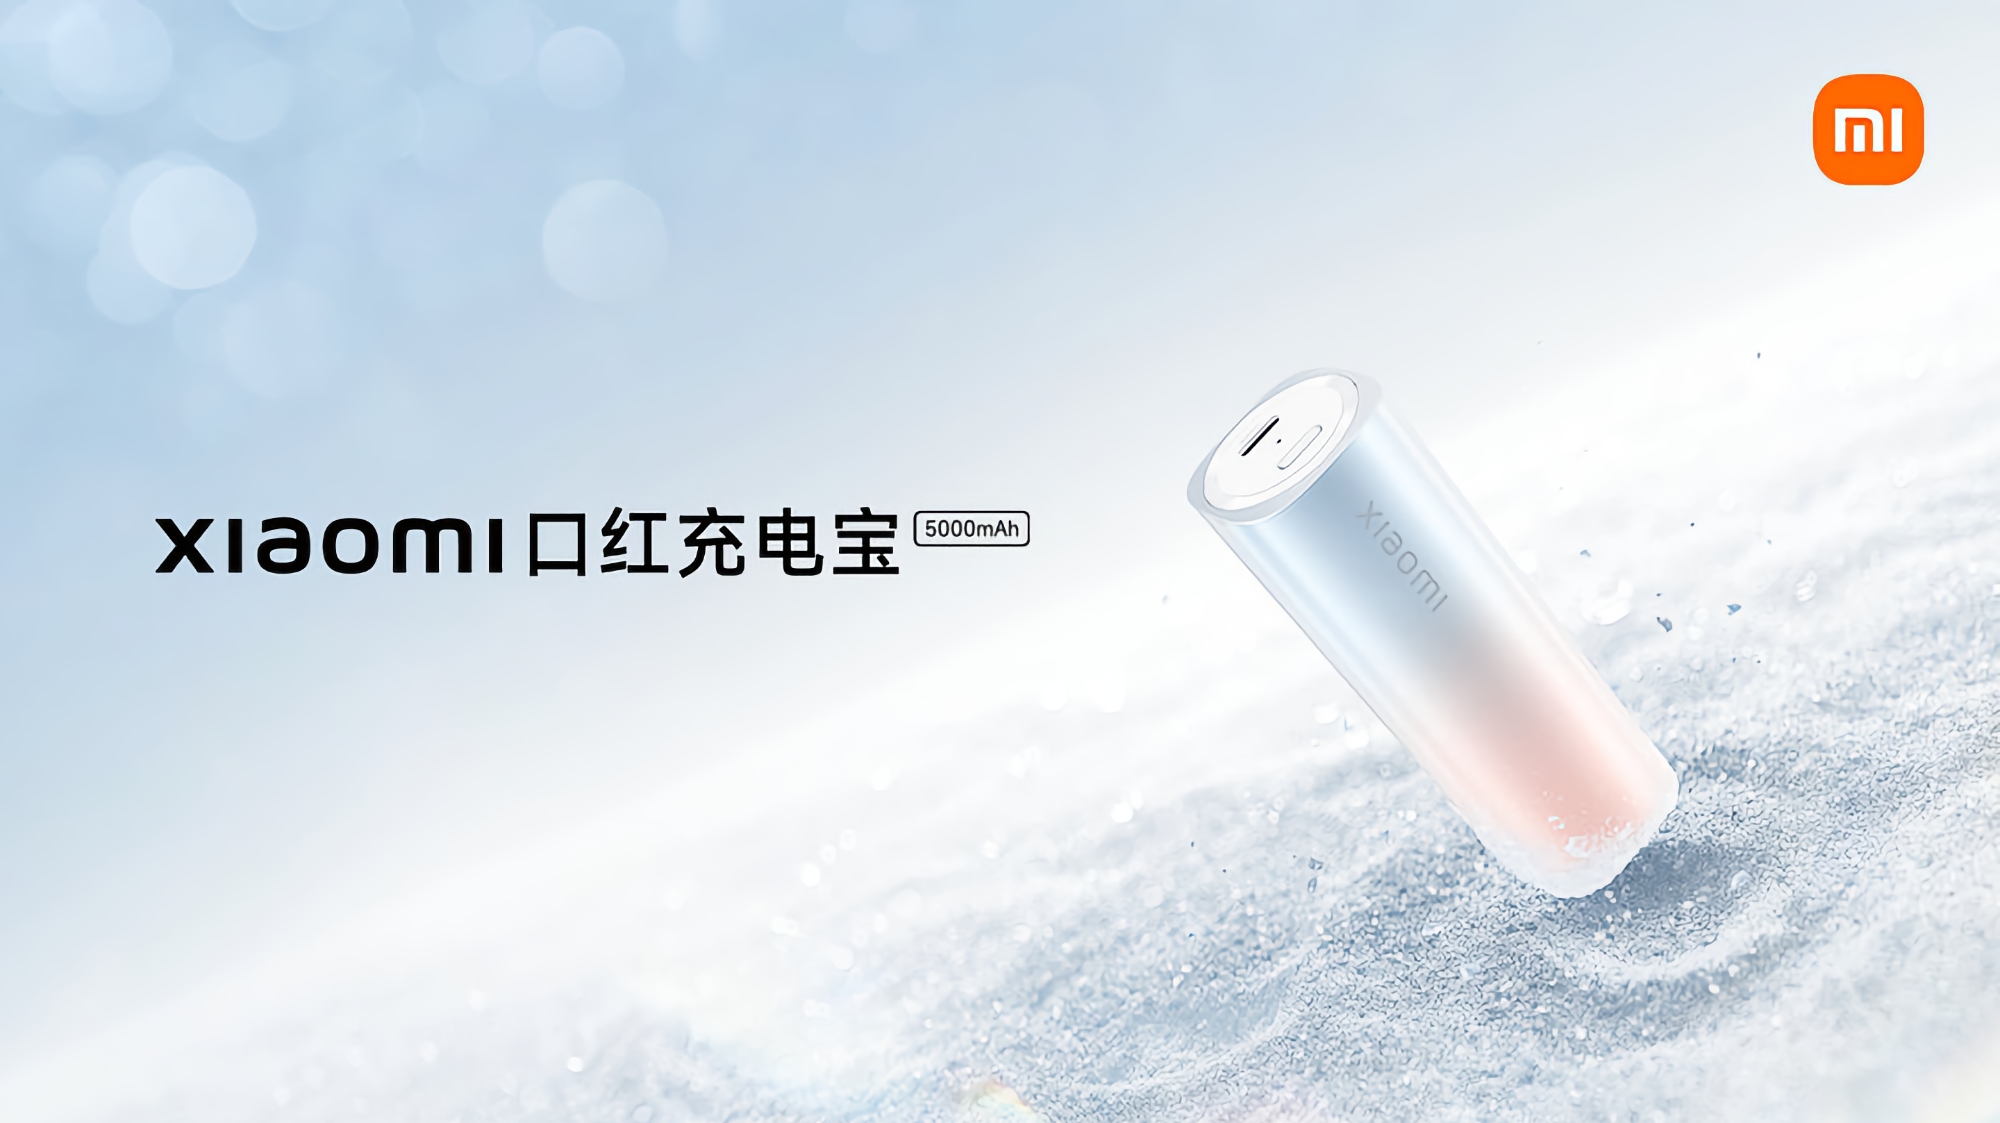 Xiaomi unveiled a 5000 mAh lipstick-shaped powerbank with 20W fast charging support